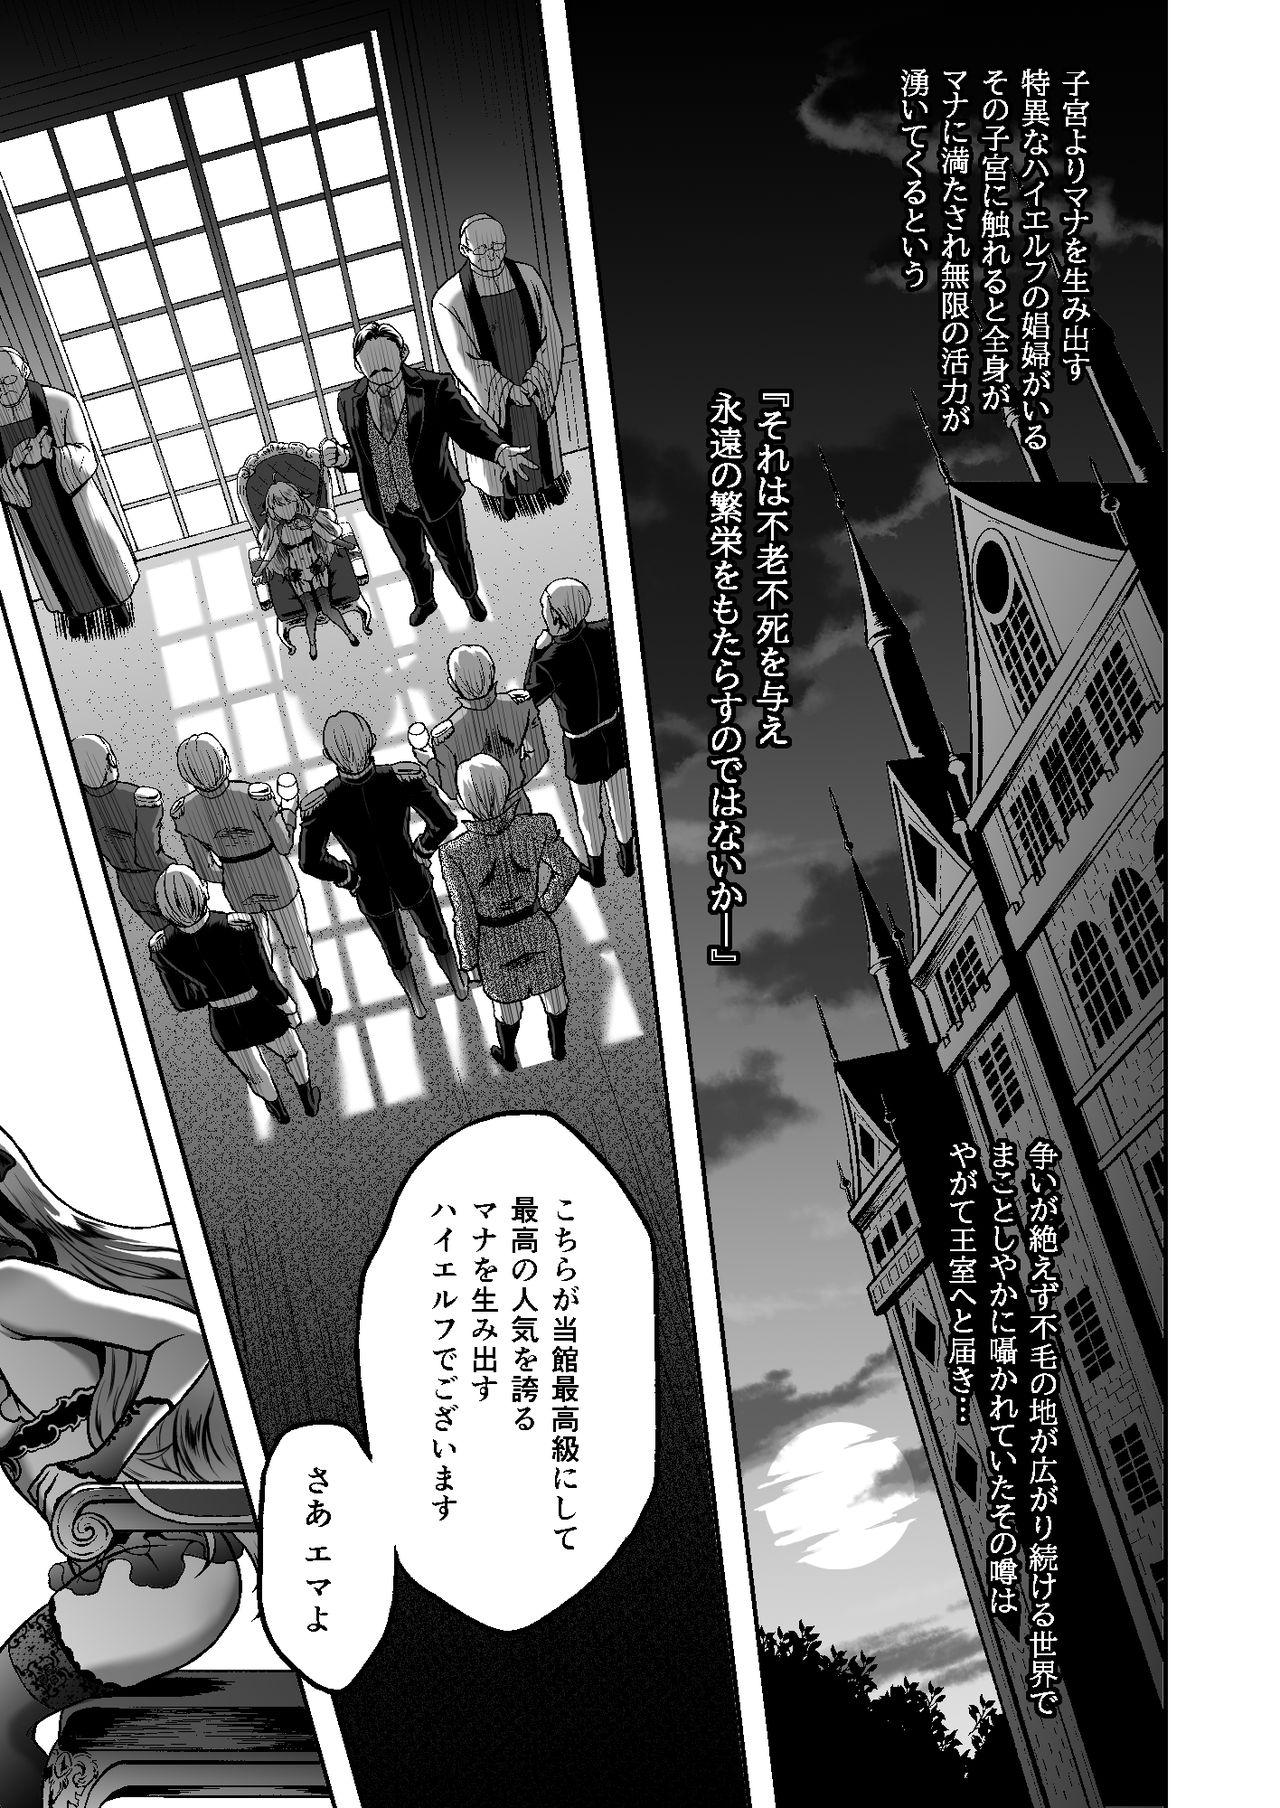 Amazing Tasogare no Shou Elf 6 - The story of Emma's side - Original Submission - Page 3